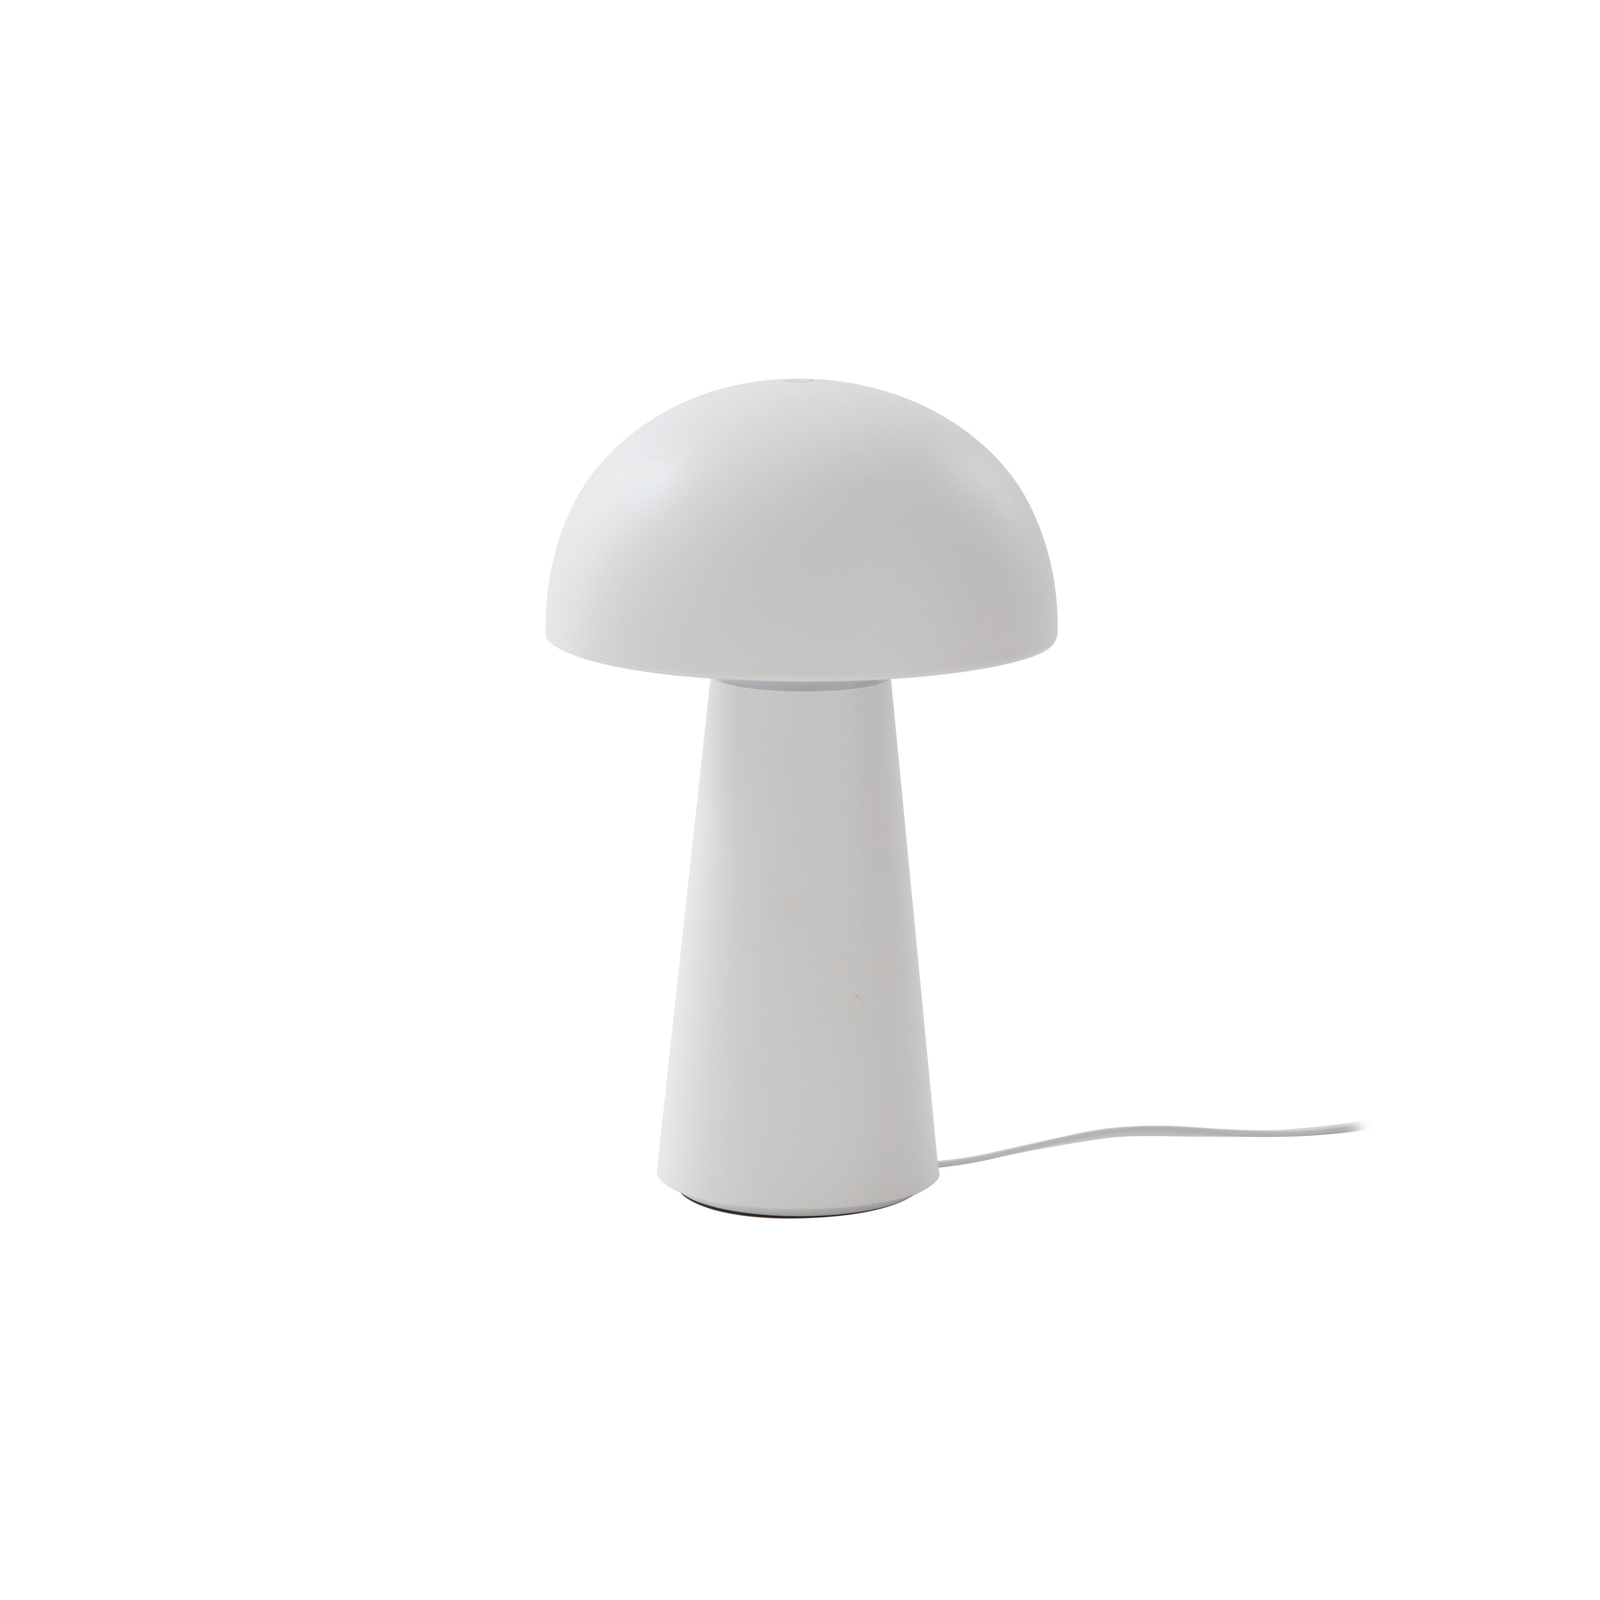 Lindby Lampe de table LED à accu Zyre, blanc, IP44, Touchdimmer